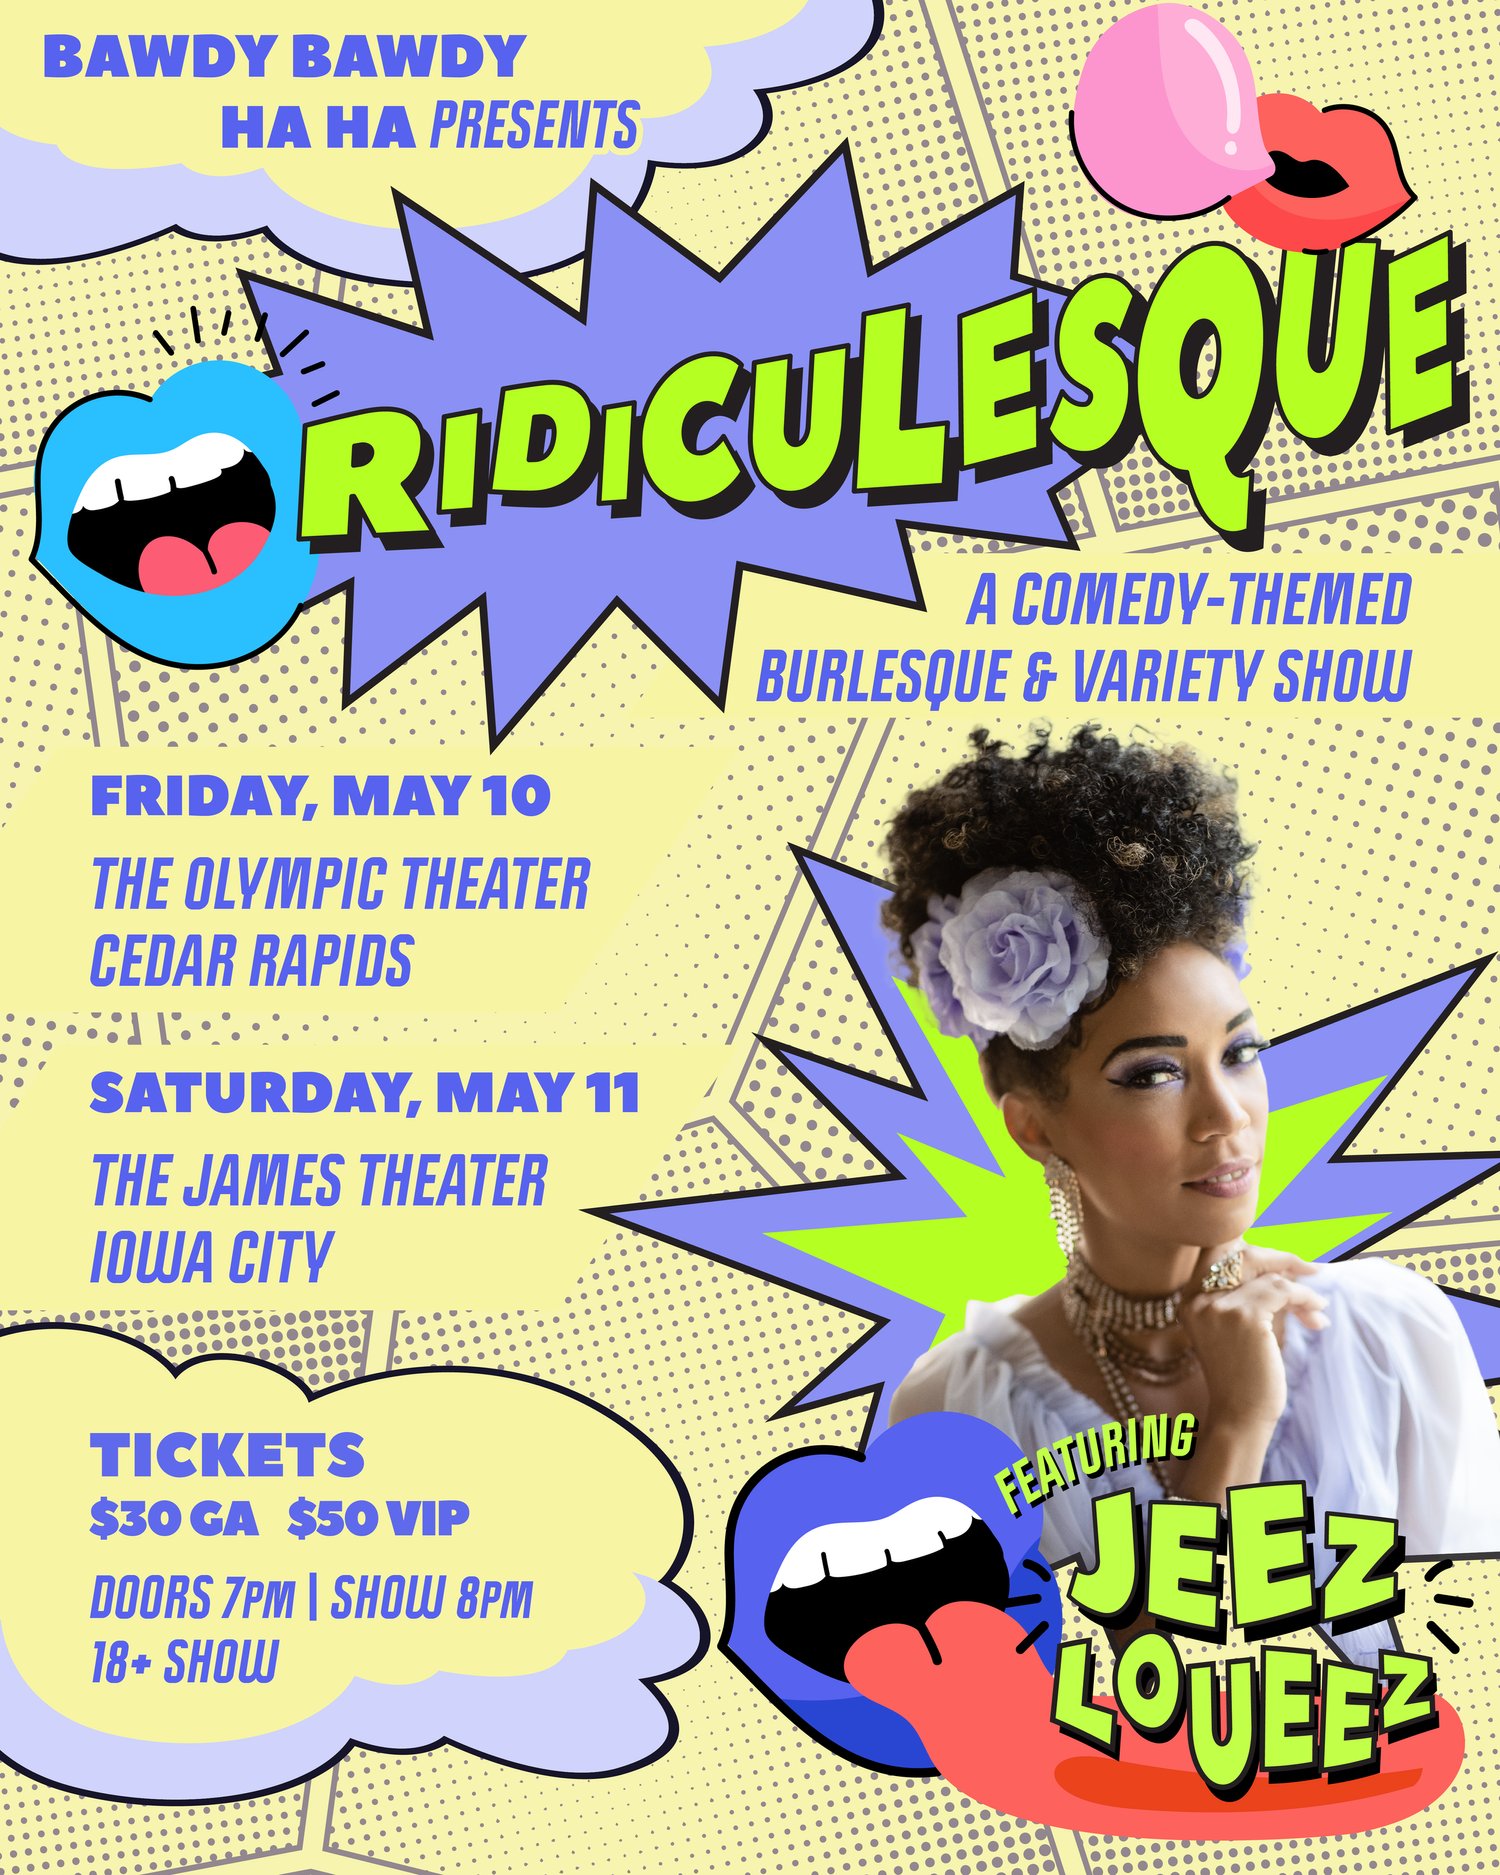 RIDICULESQUE- A Comedy-Themed Burlesque and Variety Show!